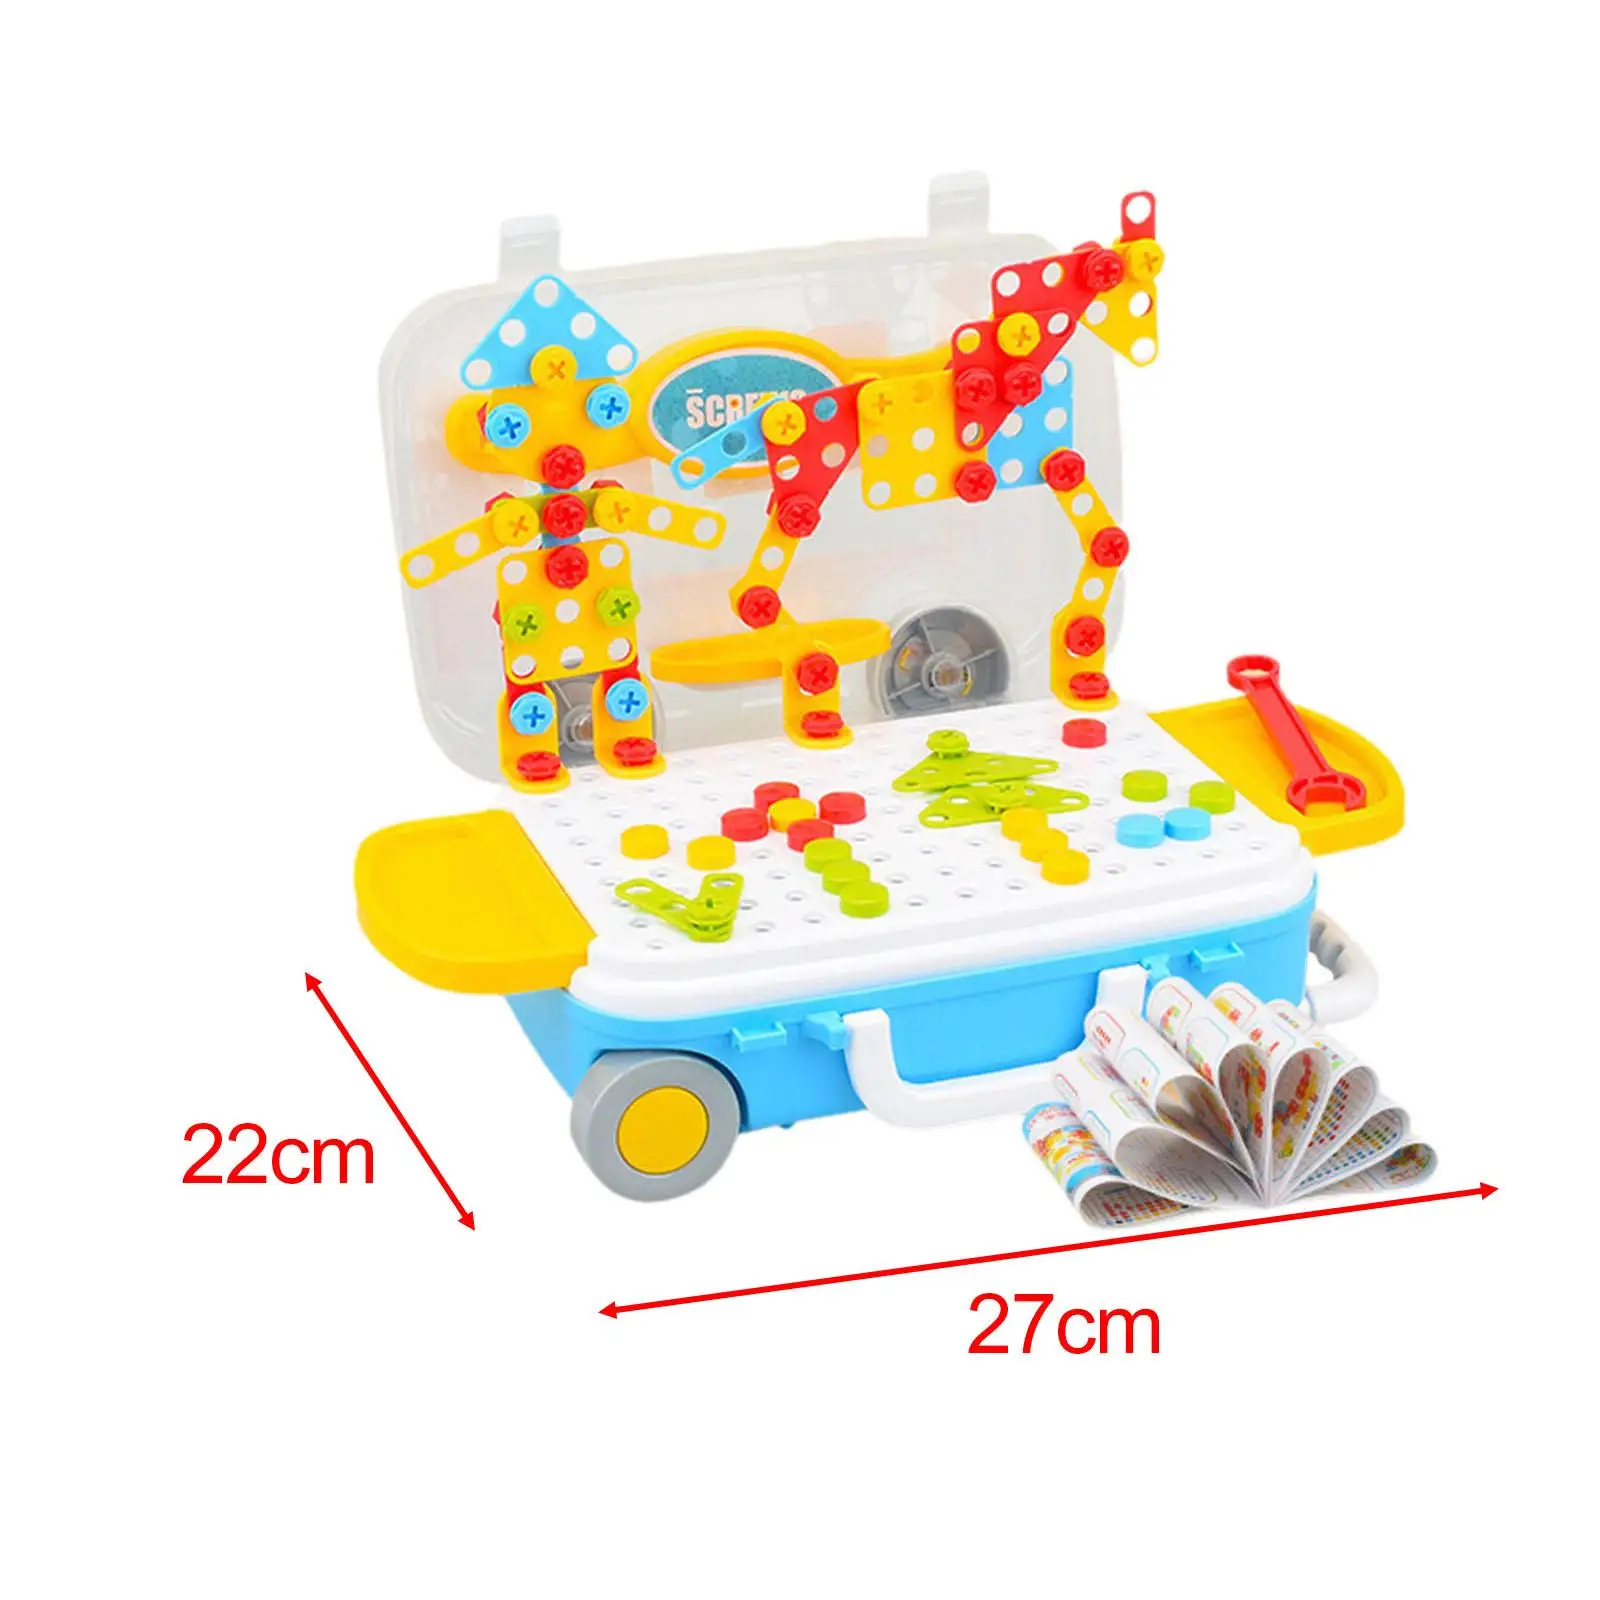 Kids Nut and Bolts Toy Electric Drill Toy DIY Electric Turn Nail Puzzle Design